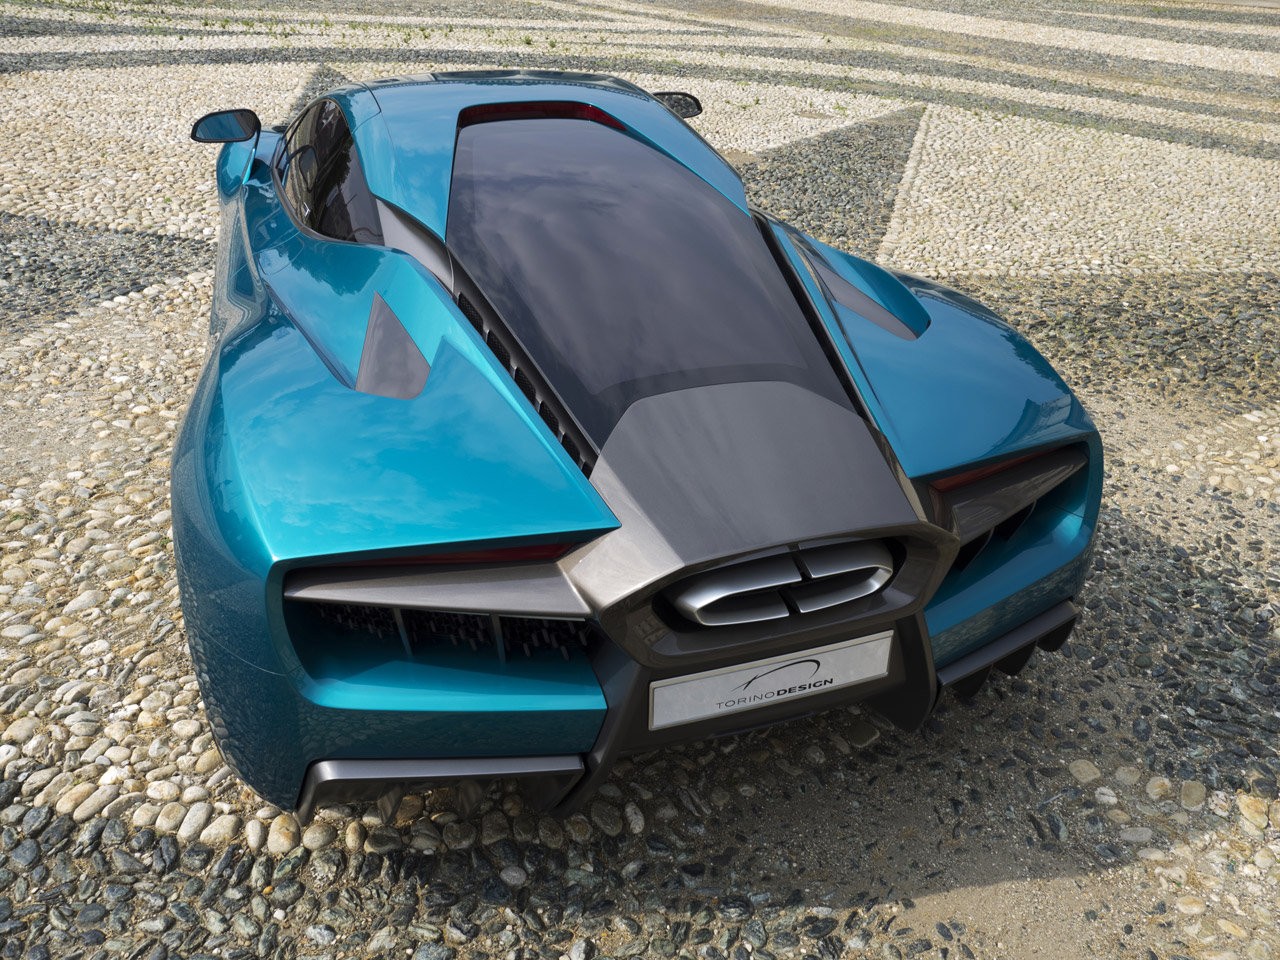 torino-design-ats-wildtwelve-is-a-hybrid-hypercar-that-can-do-390-km-h-photo-gallery_3